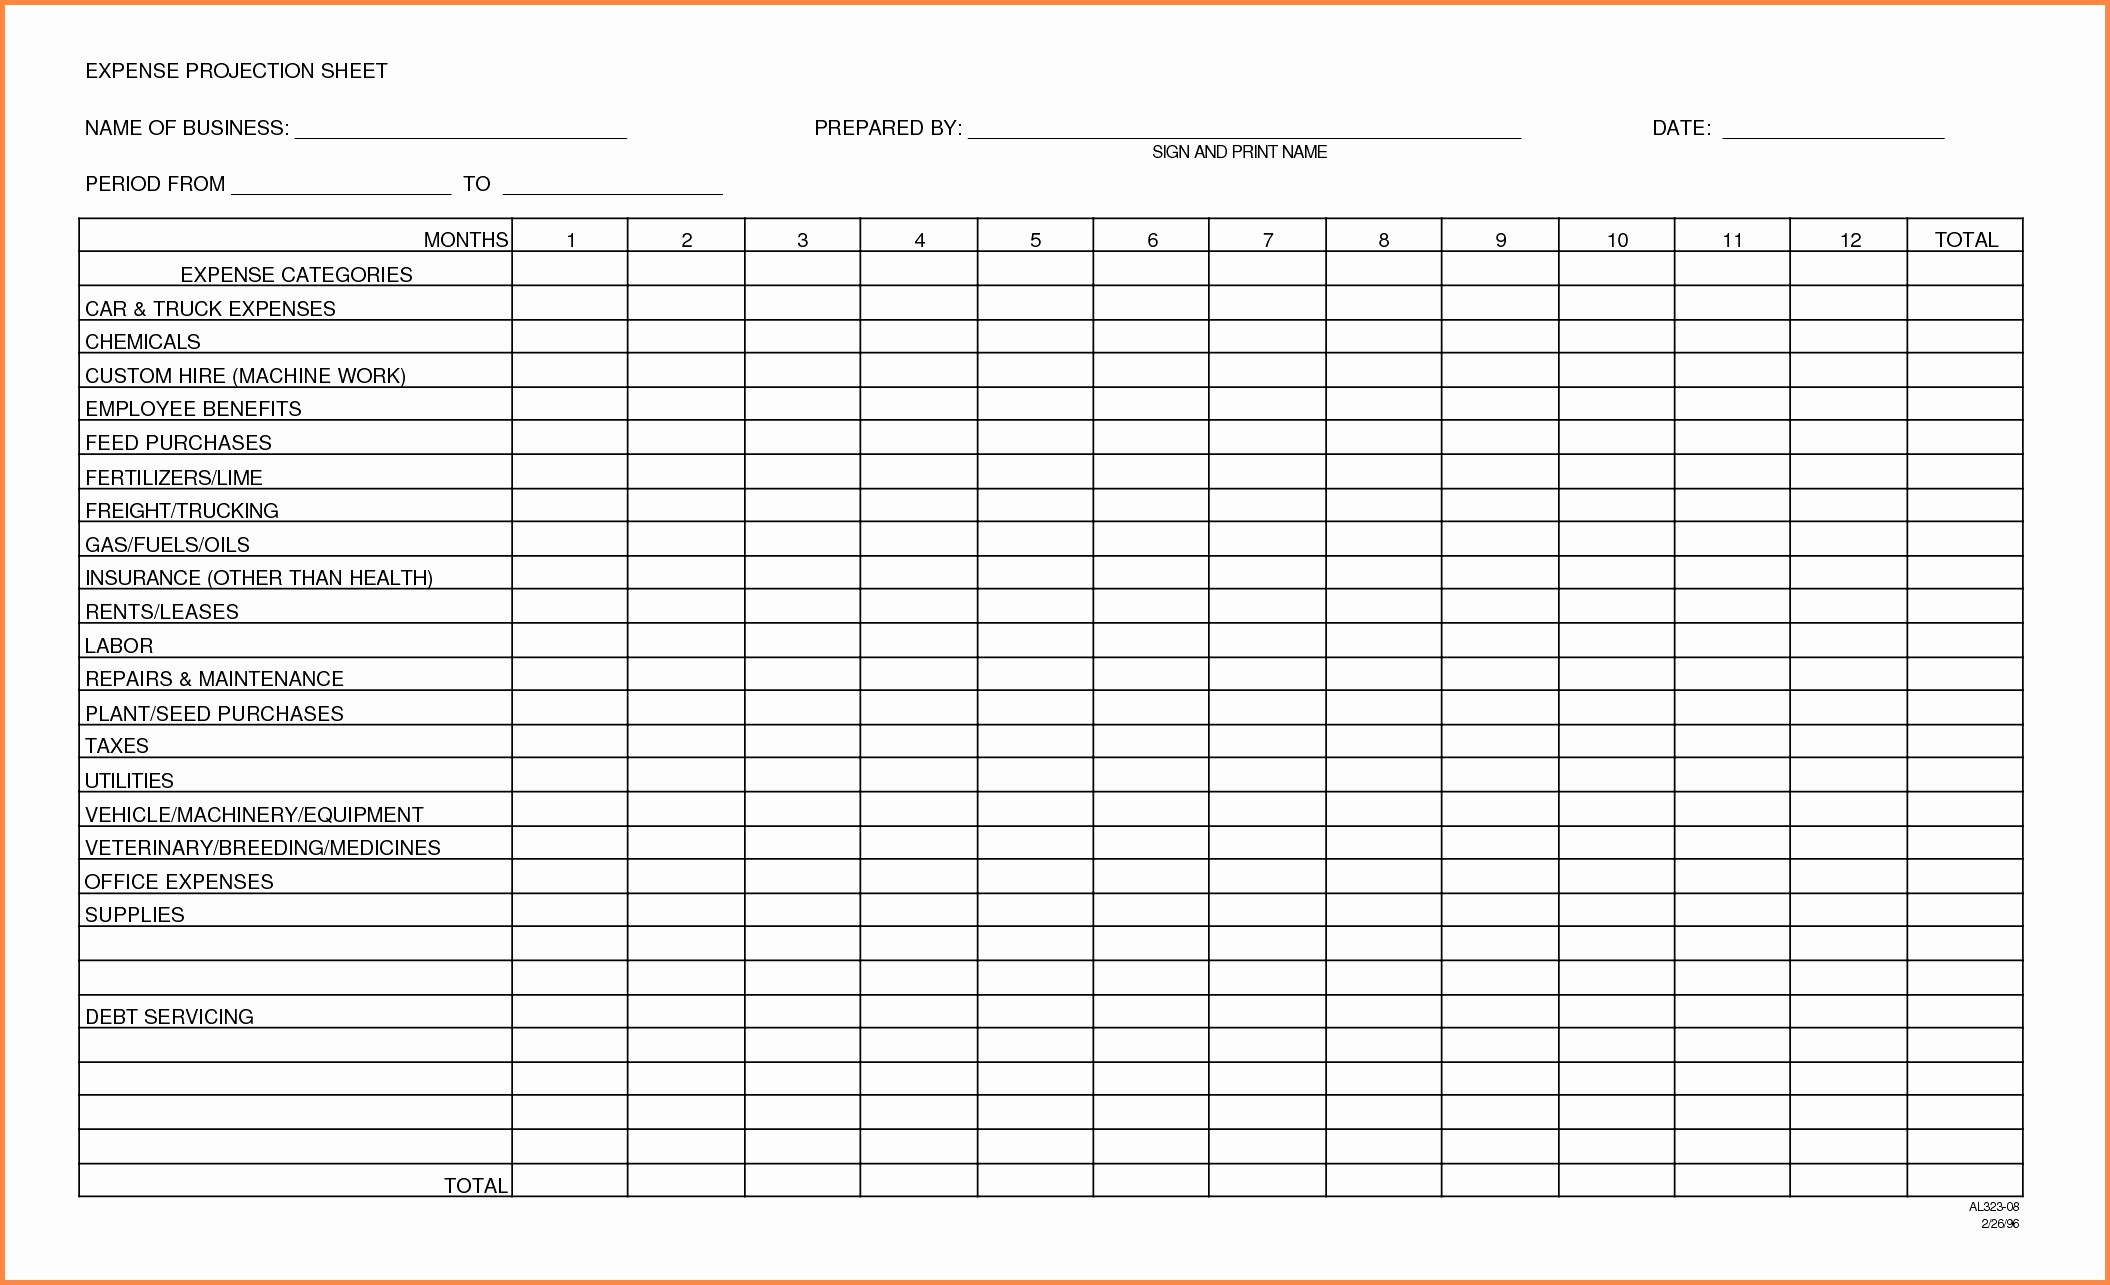 50 Awesome Trucking Income And Expense Spreadsheet DOCUMENTS IDEAS